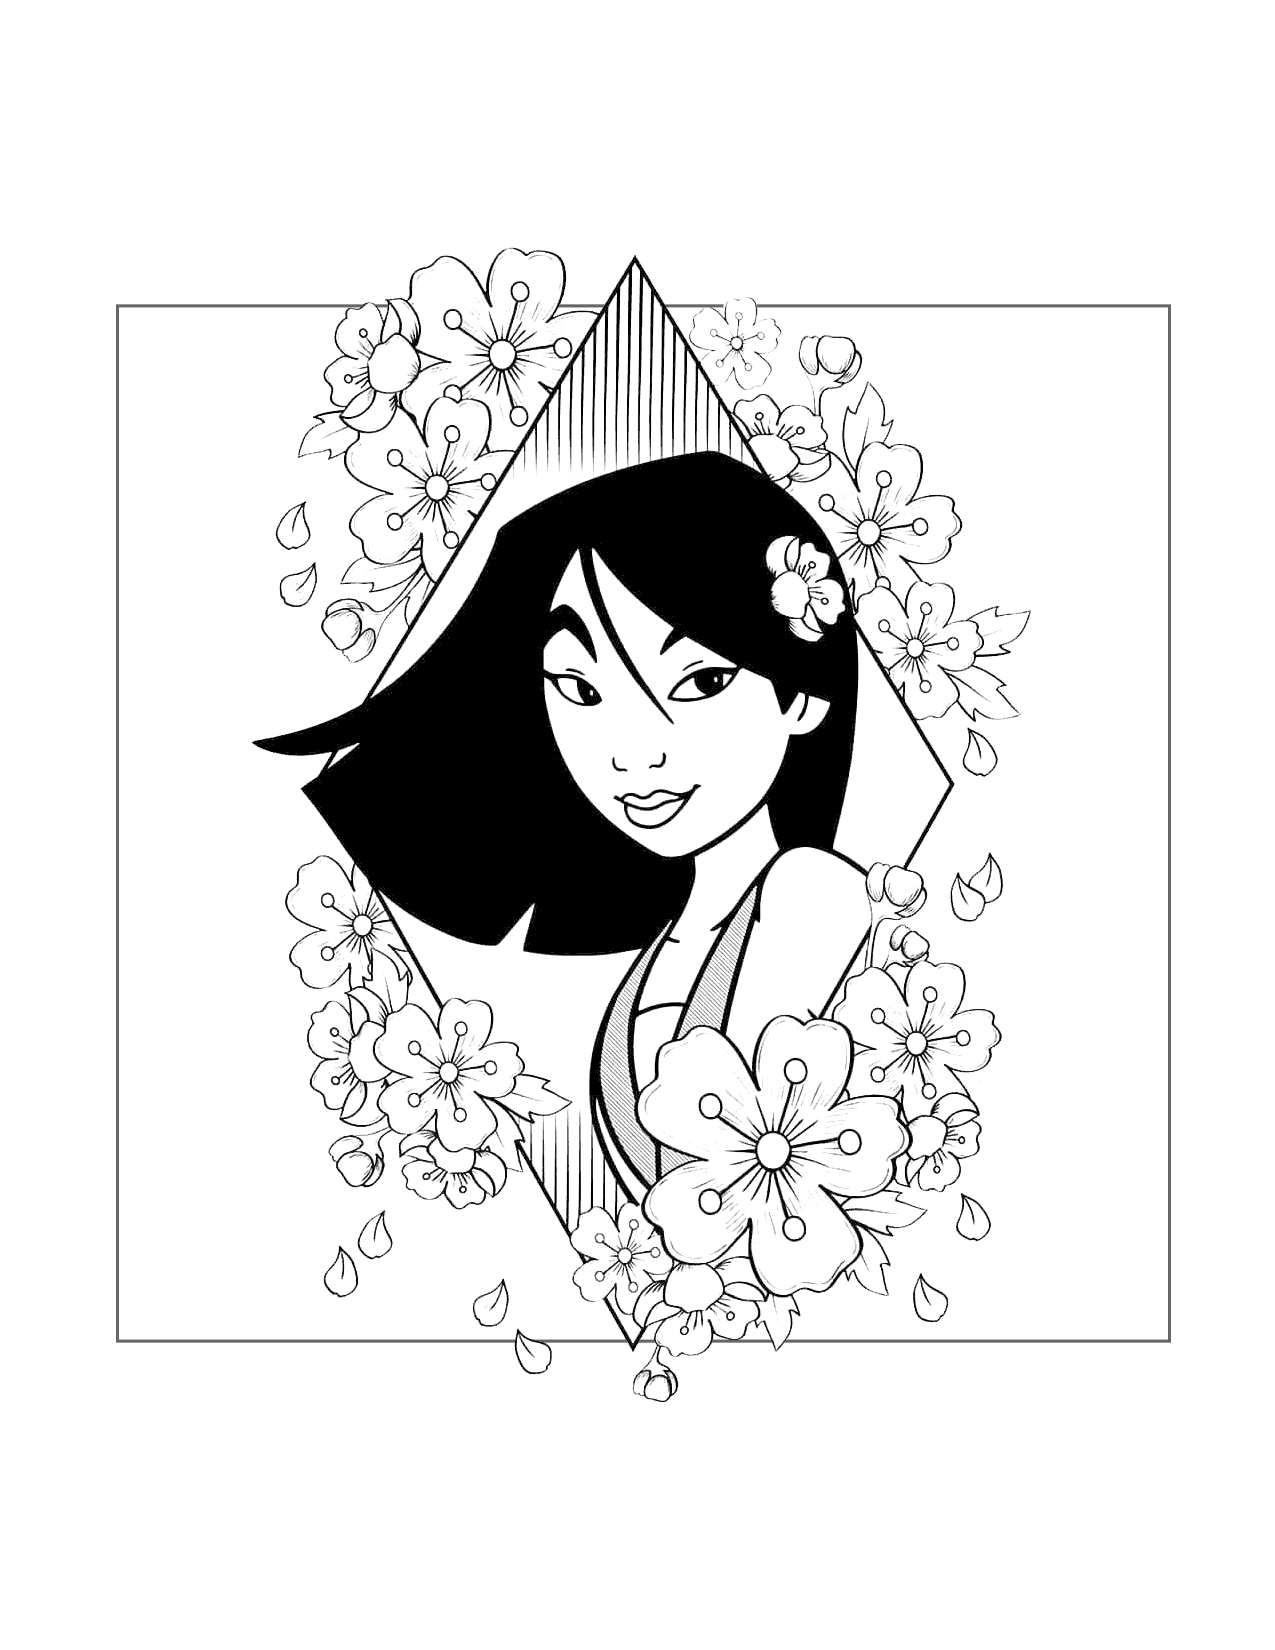 Mulan With Flowers Coloring Page